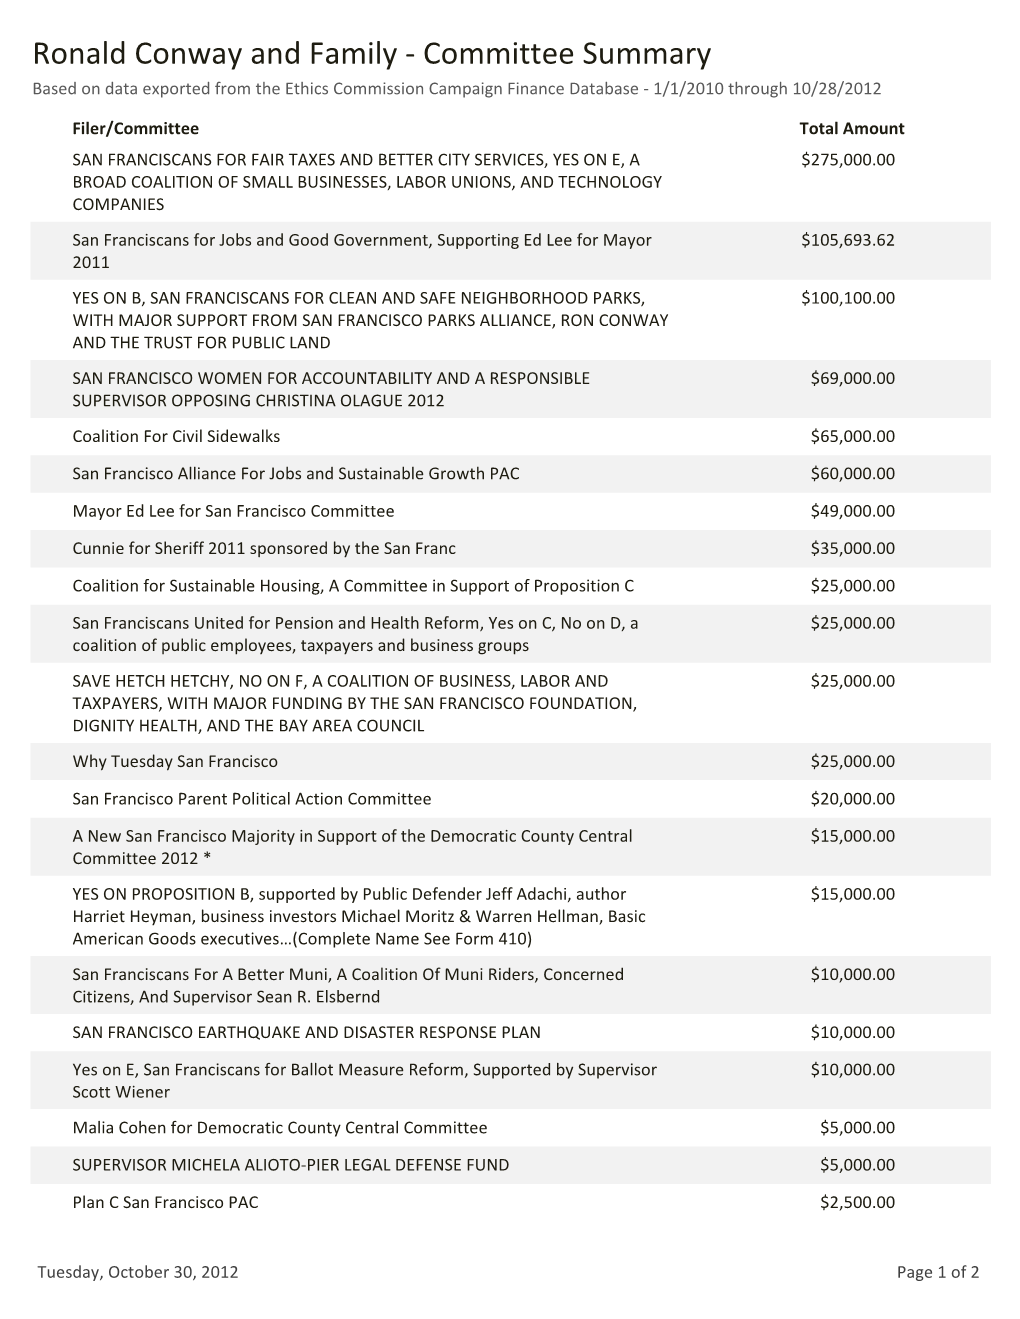 Ronald Conway and Family - Committee Summary Based on Data Exported from the Ethics Commission Campaign Finance Database - 1/1/2010 Through 10/28/2012